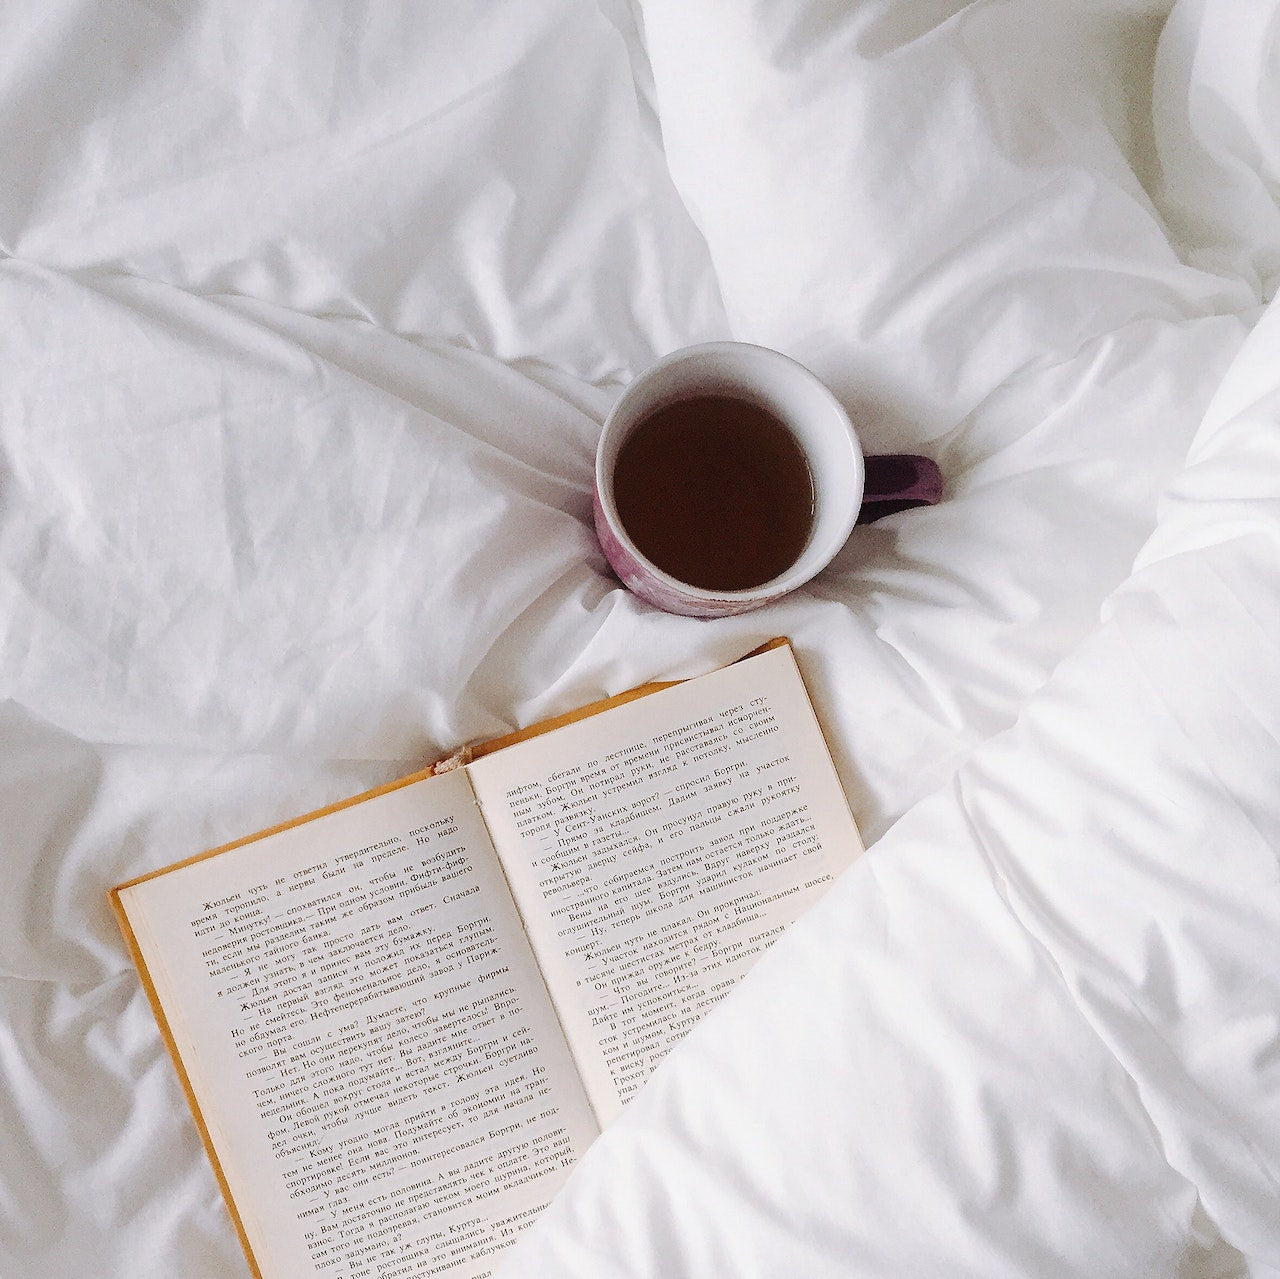 A cup of tea and book on bed